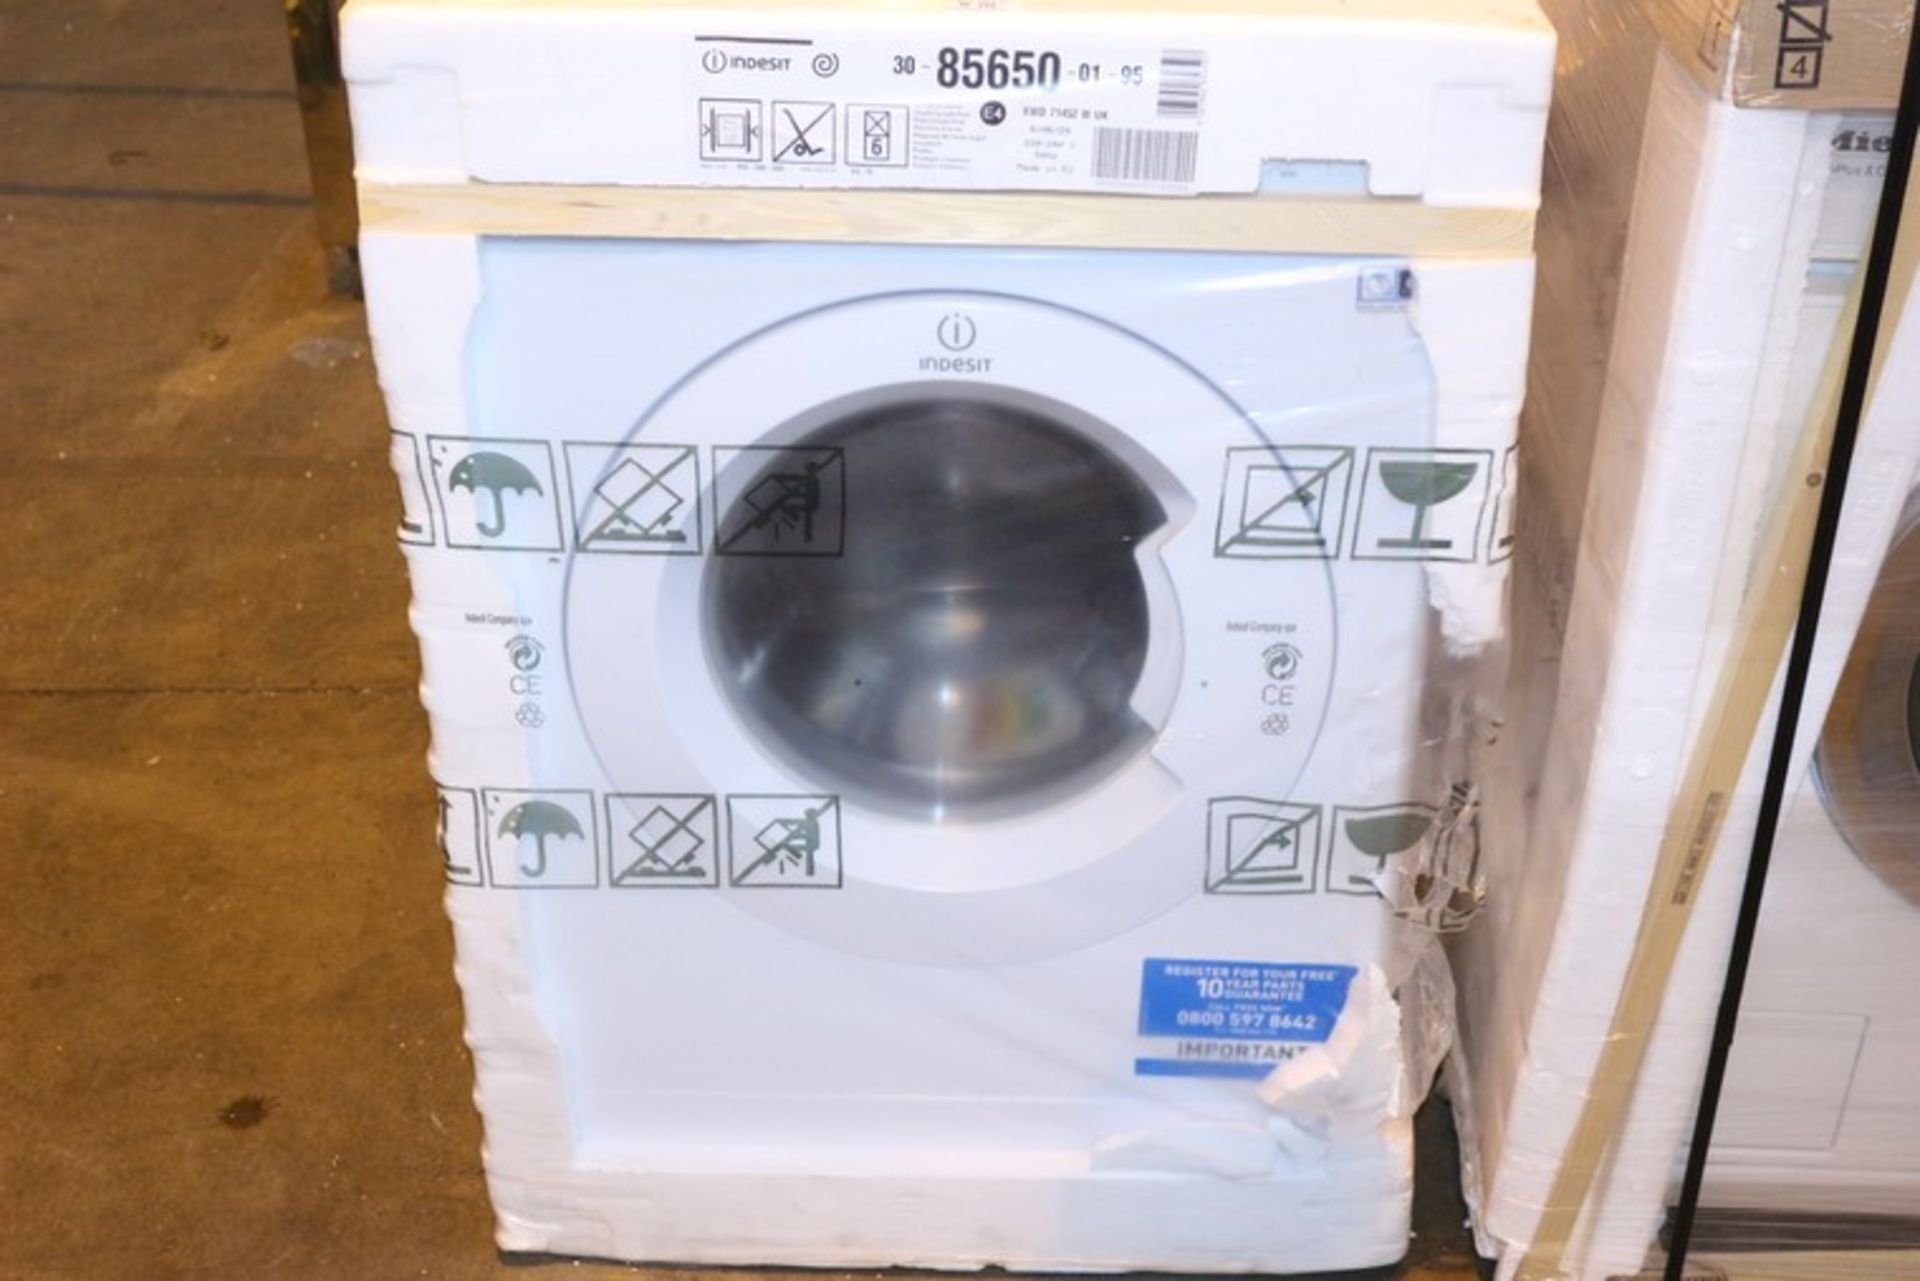 1 x BOXED INDESIT XWD7152WUK UNDER THE COUNTER WASHING MACHINE IN WHITE (88932006) RRP £300 (1.12.